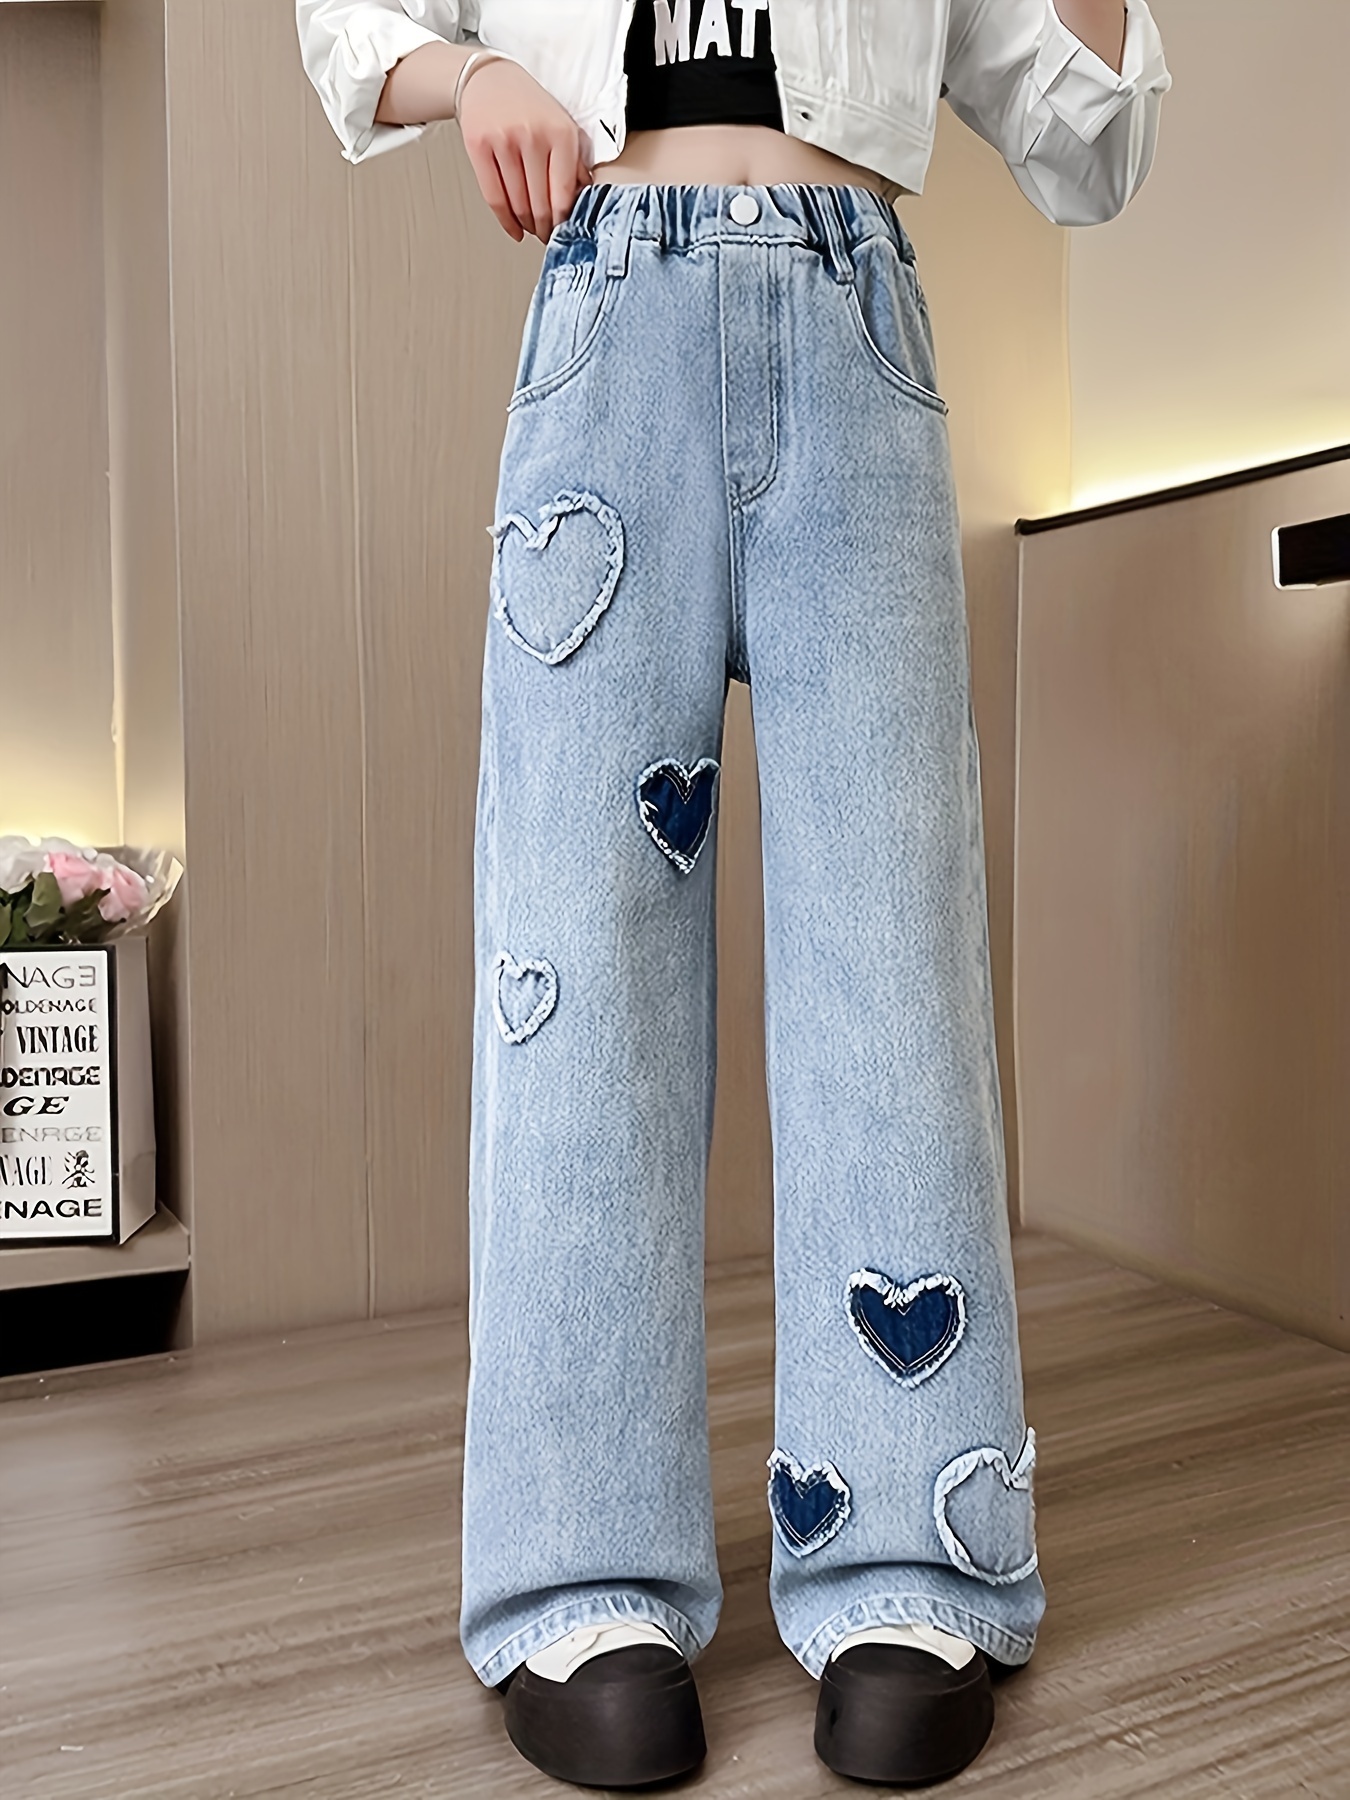 Trendy Girls Heart Patch Baggy Jeans Comfy and Versatile Denim Pants for  Streetwear and Going Out